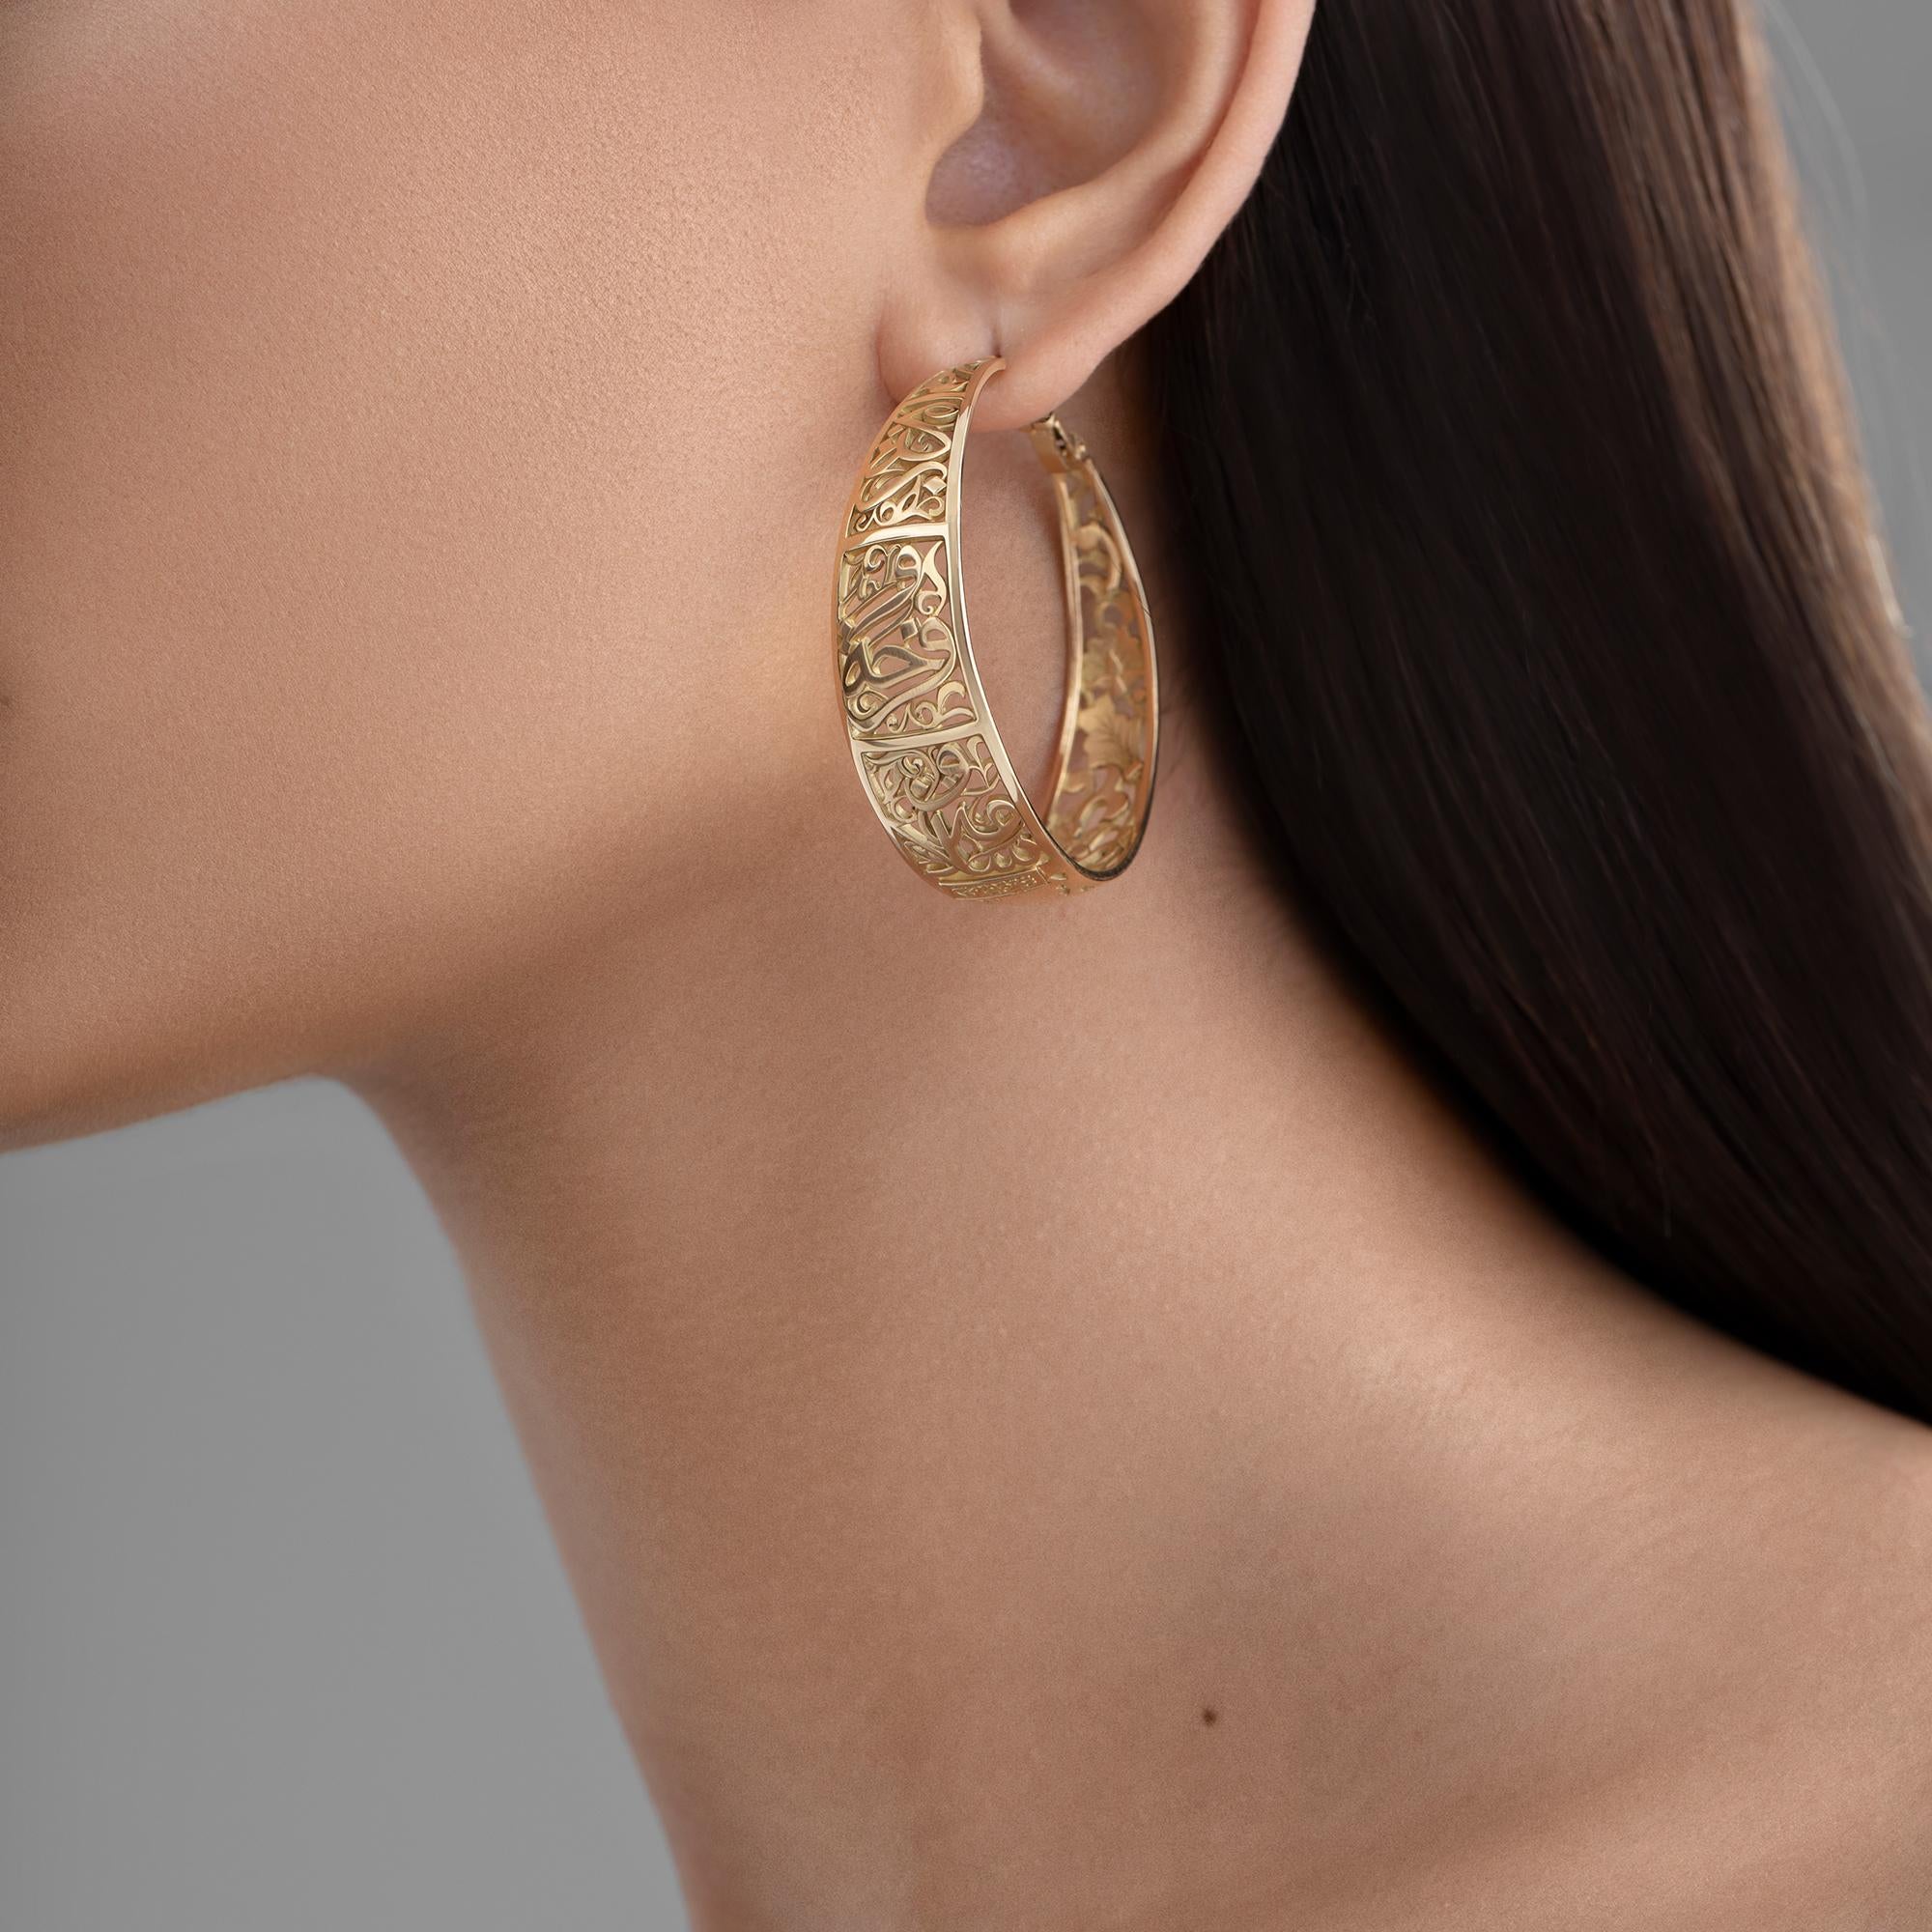 18 Karat Gold Hoop Earrings handcrafted with hand-pierced floral motifs and calligraphy. From Azza Fahmy's Tribal collection, celebrating the nomadic Amazigh tribes people of Northern Africa.

Tribal-inspired earrings with hand-pierced floral motifs